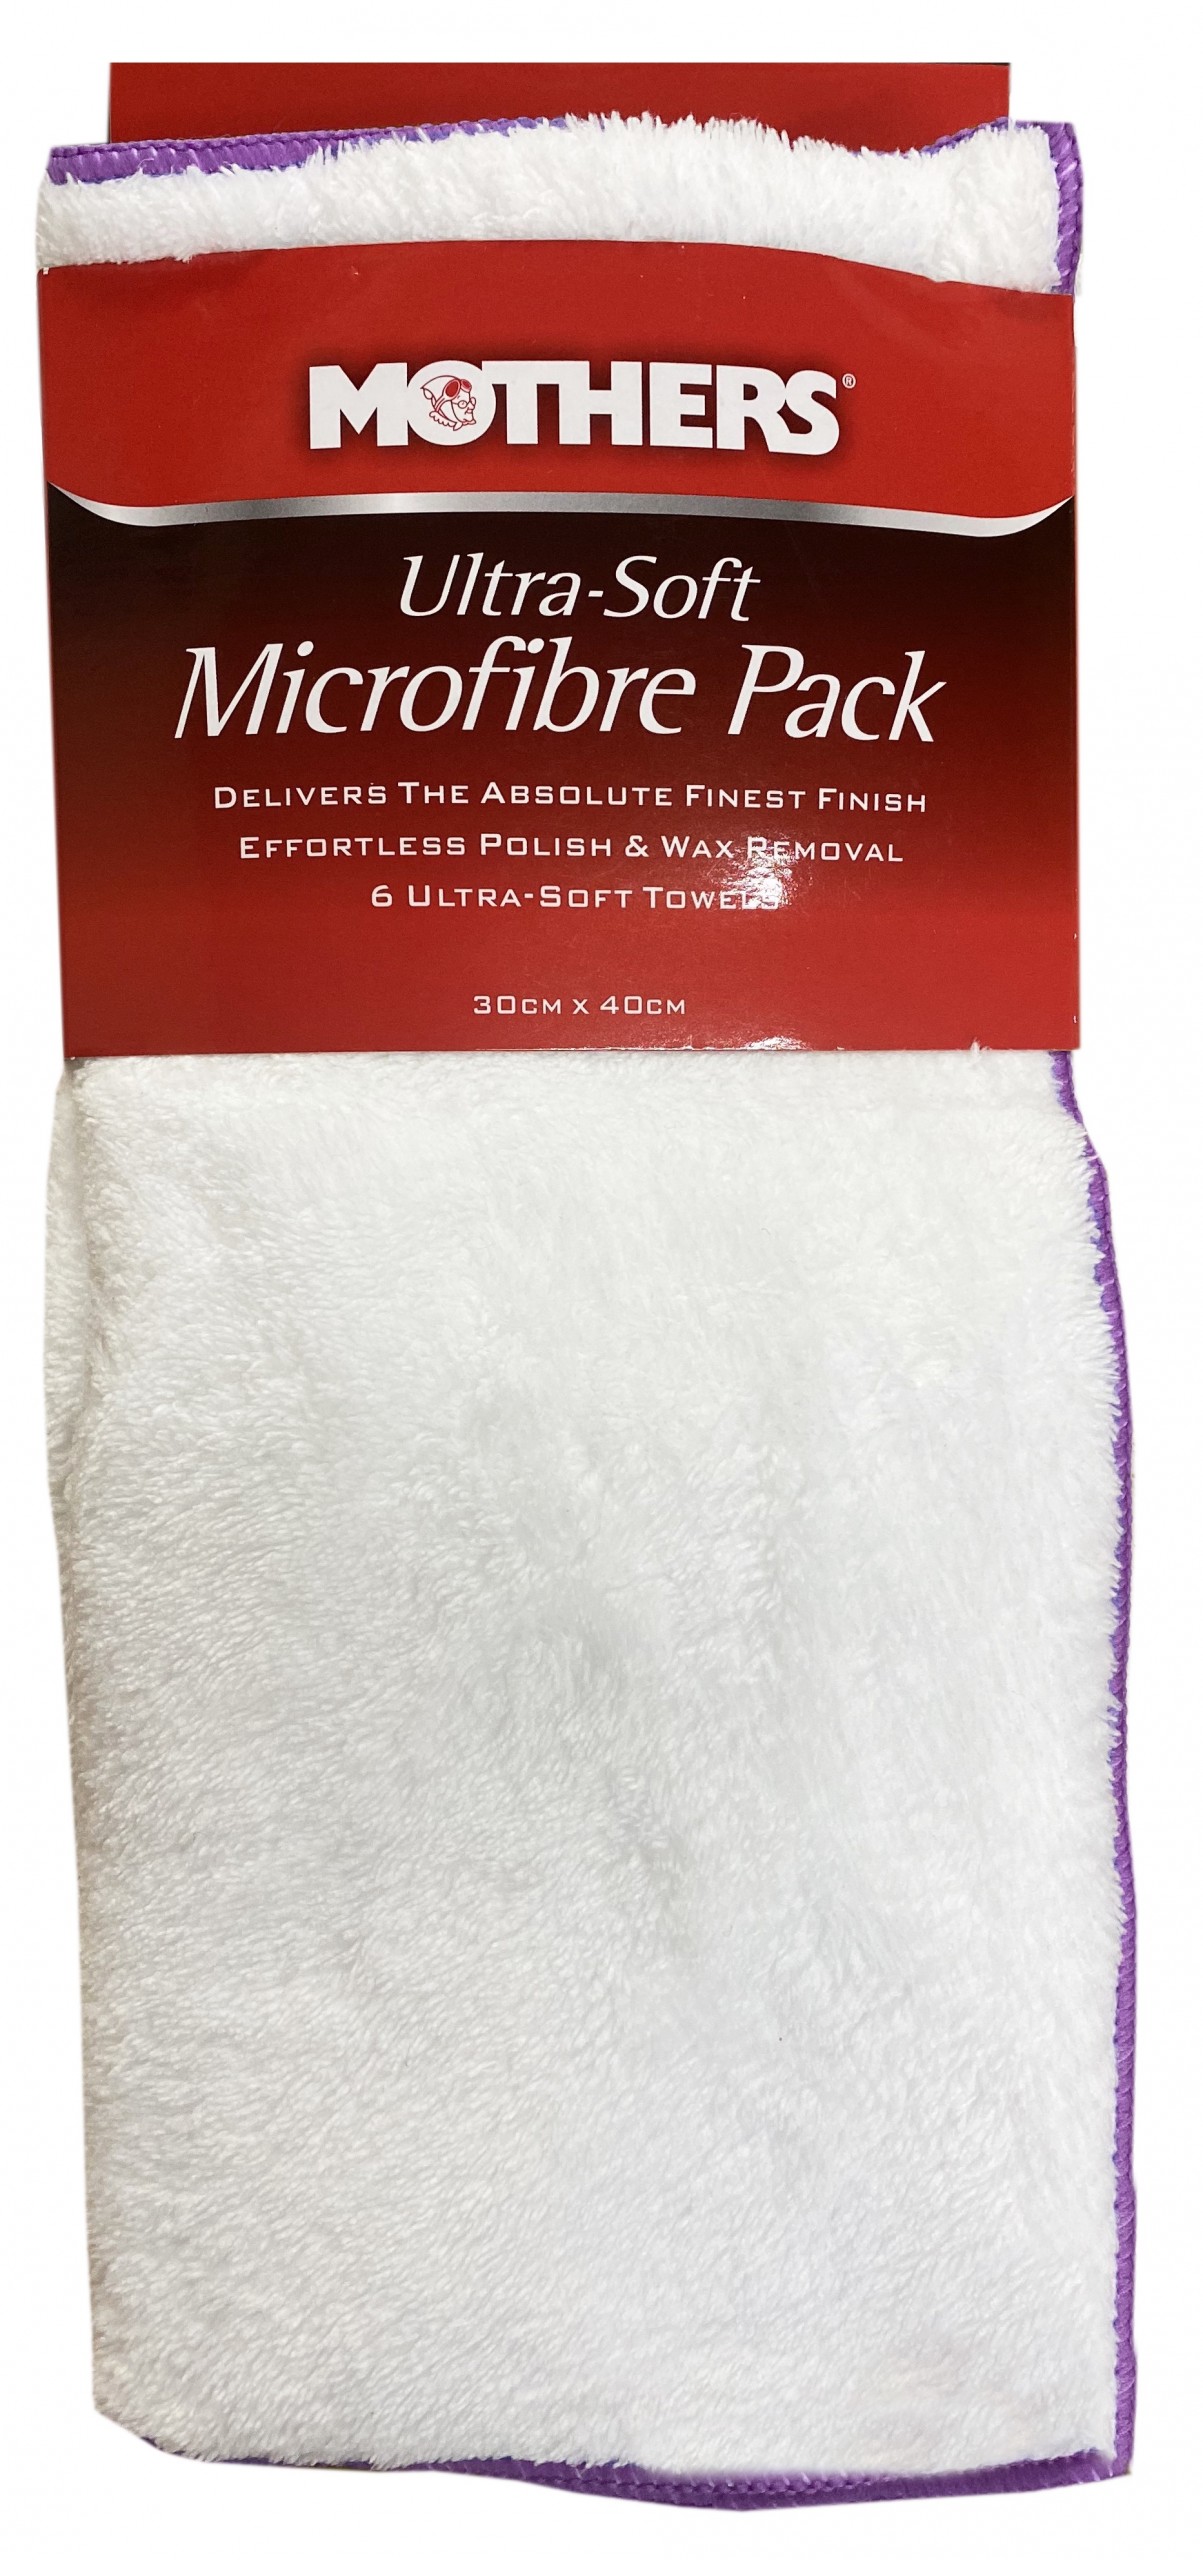 Mothers Ultra-Soft Microfibre Pack